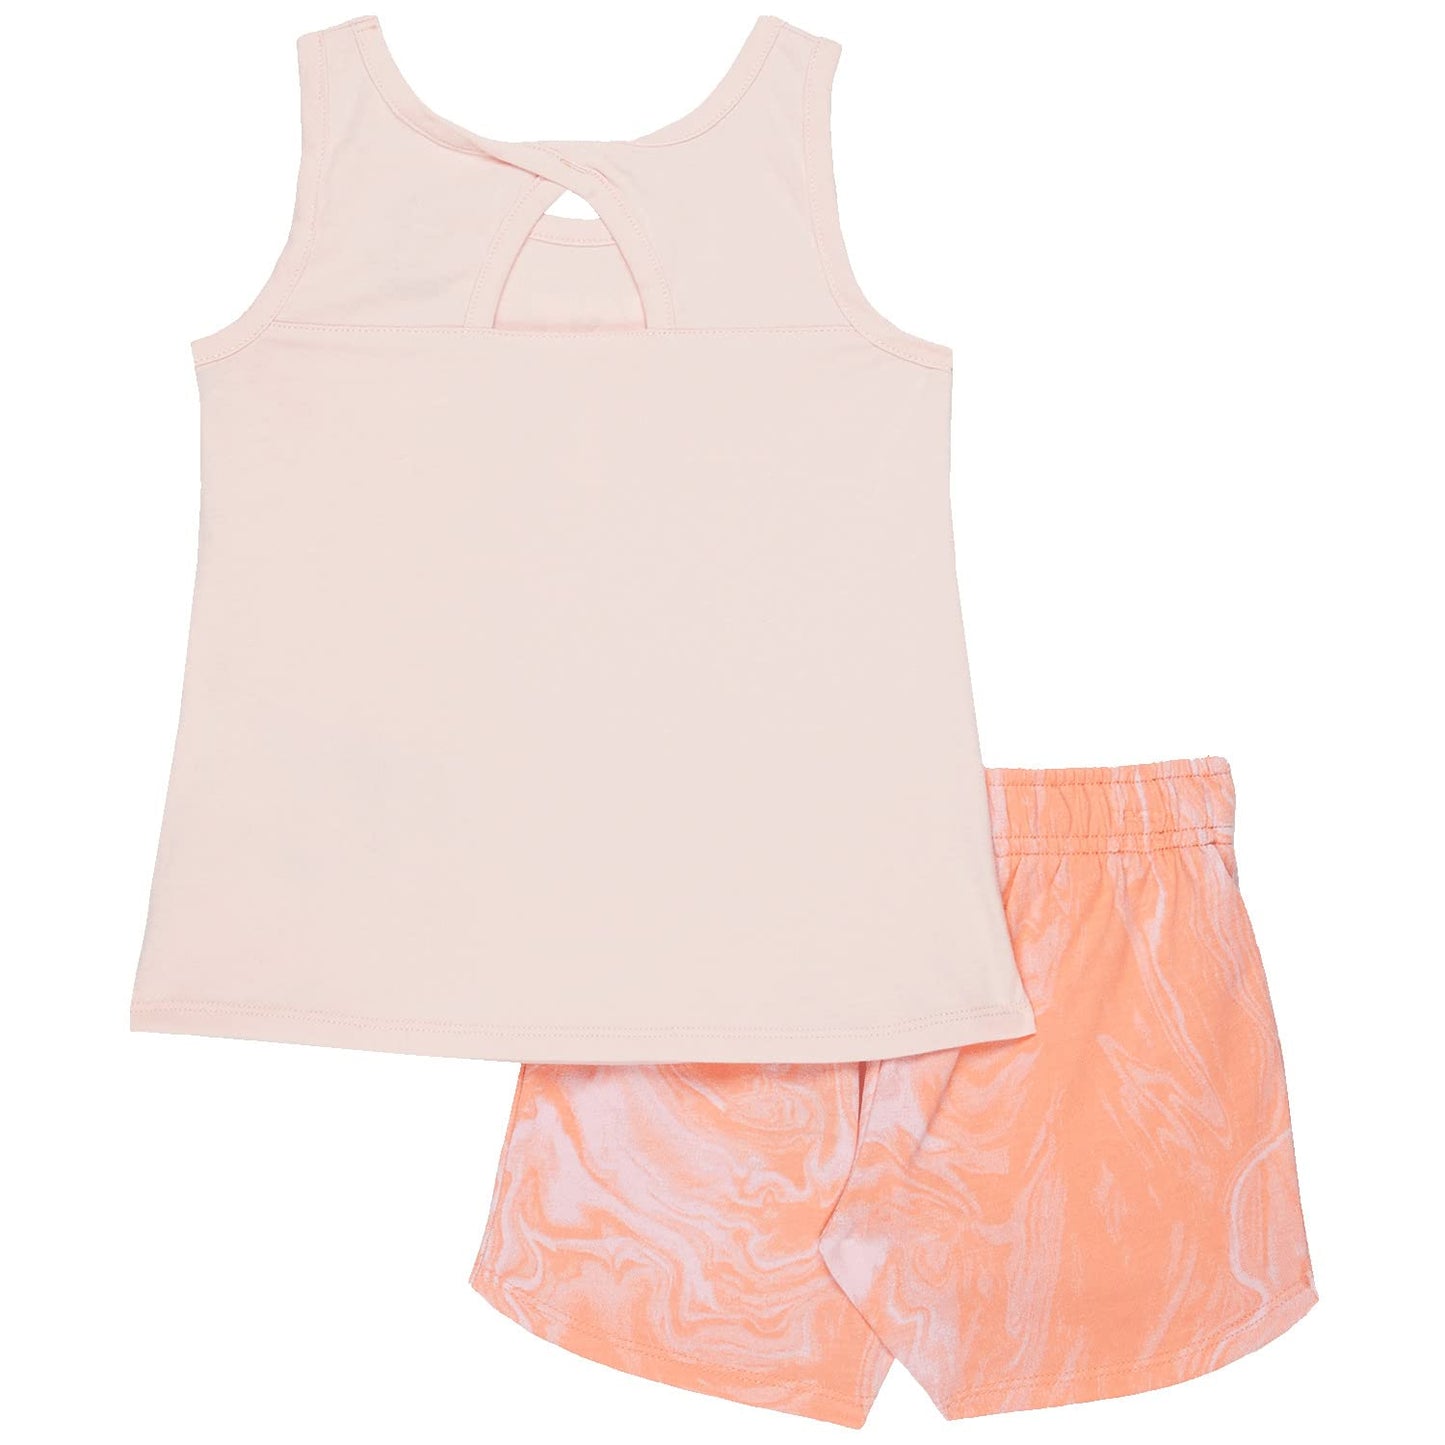 Image 2 of Graphic Tank Top and French Terry Shorts Set (Toddler)